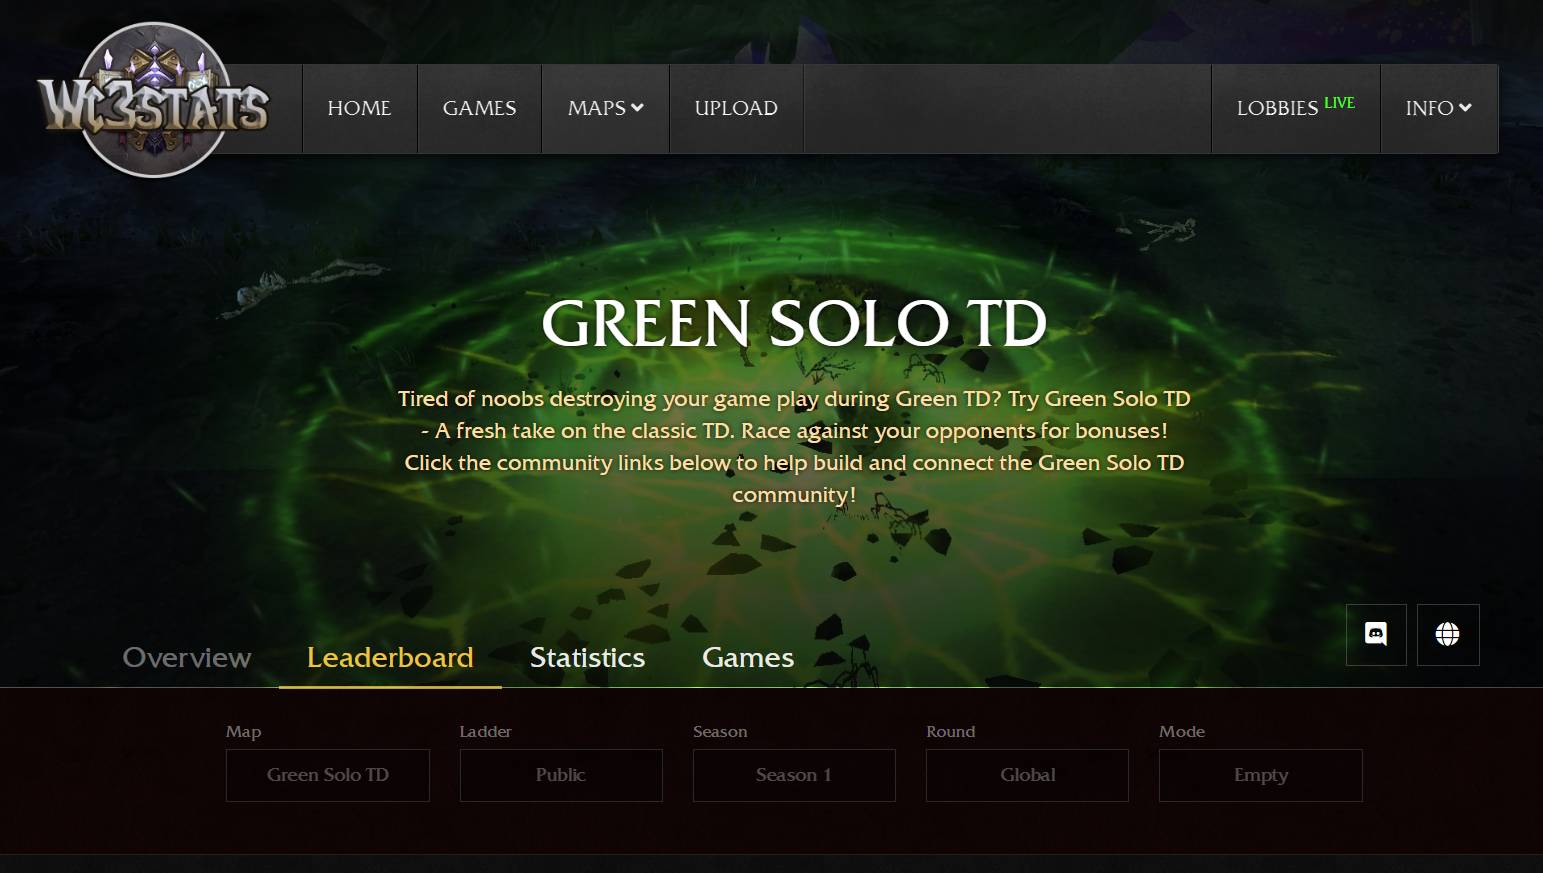 Green Solo TD Online Rankings on WC3Stats.com